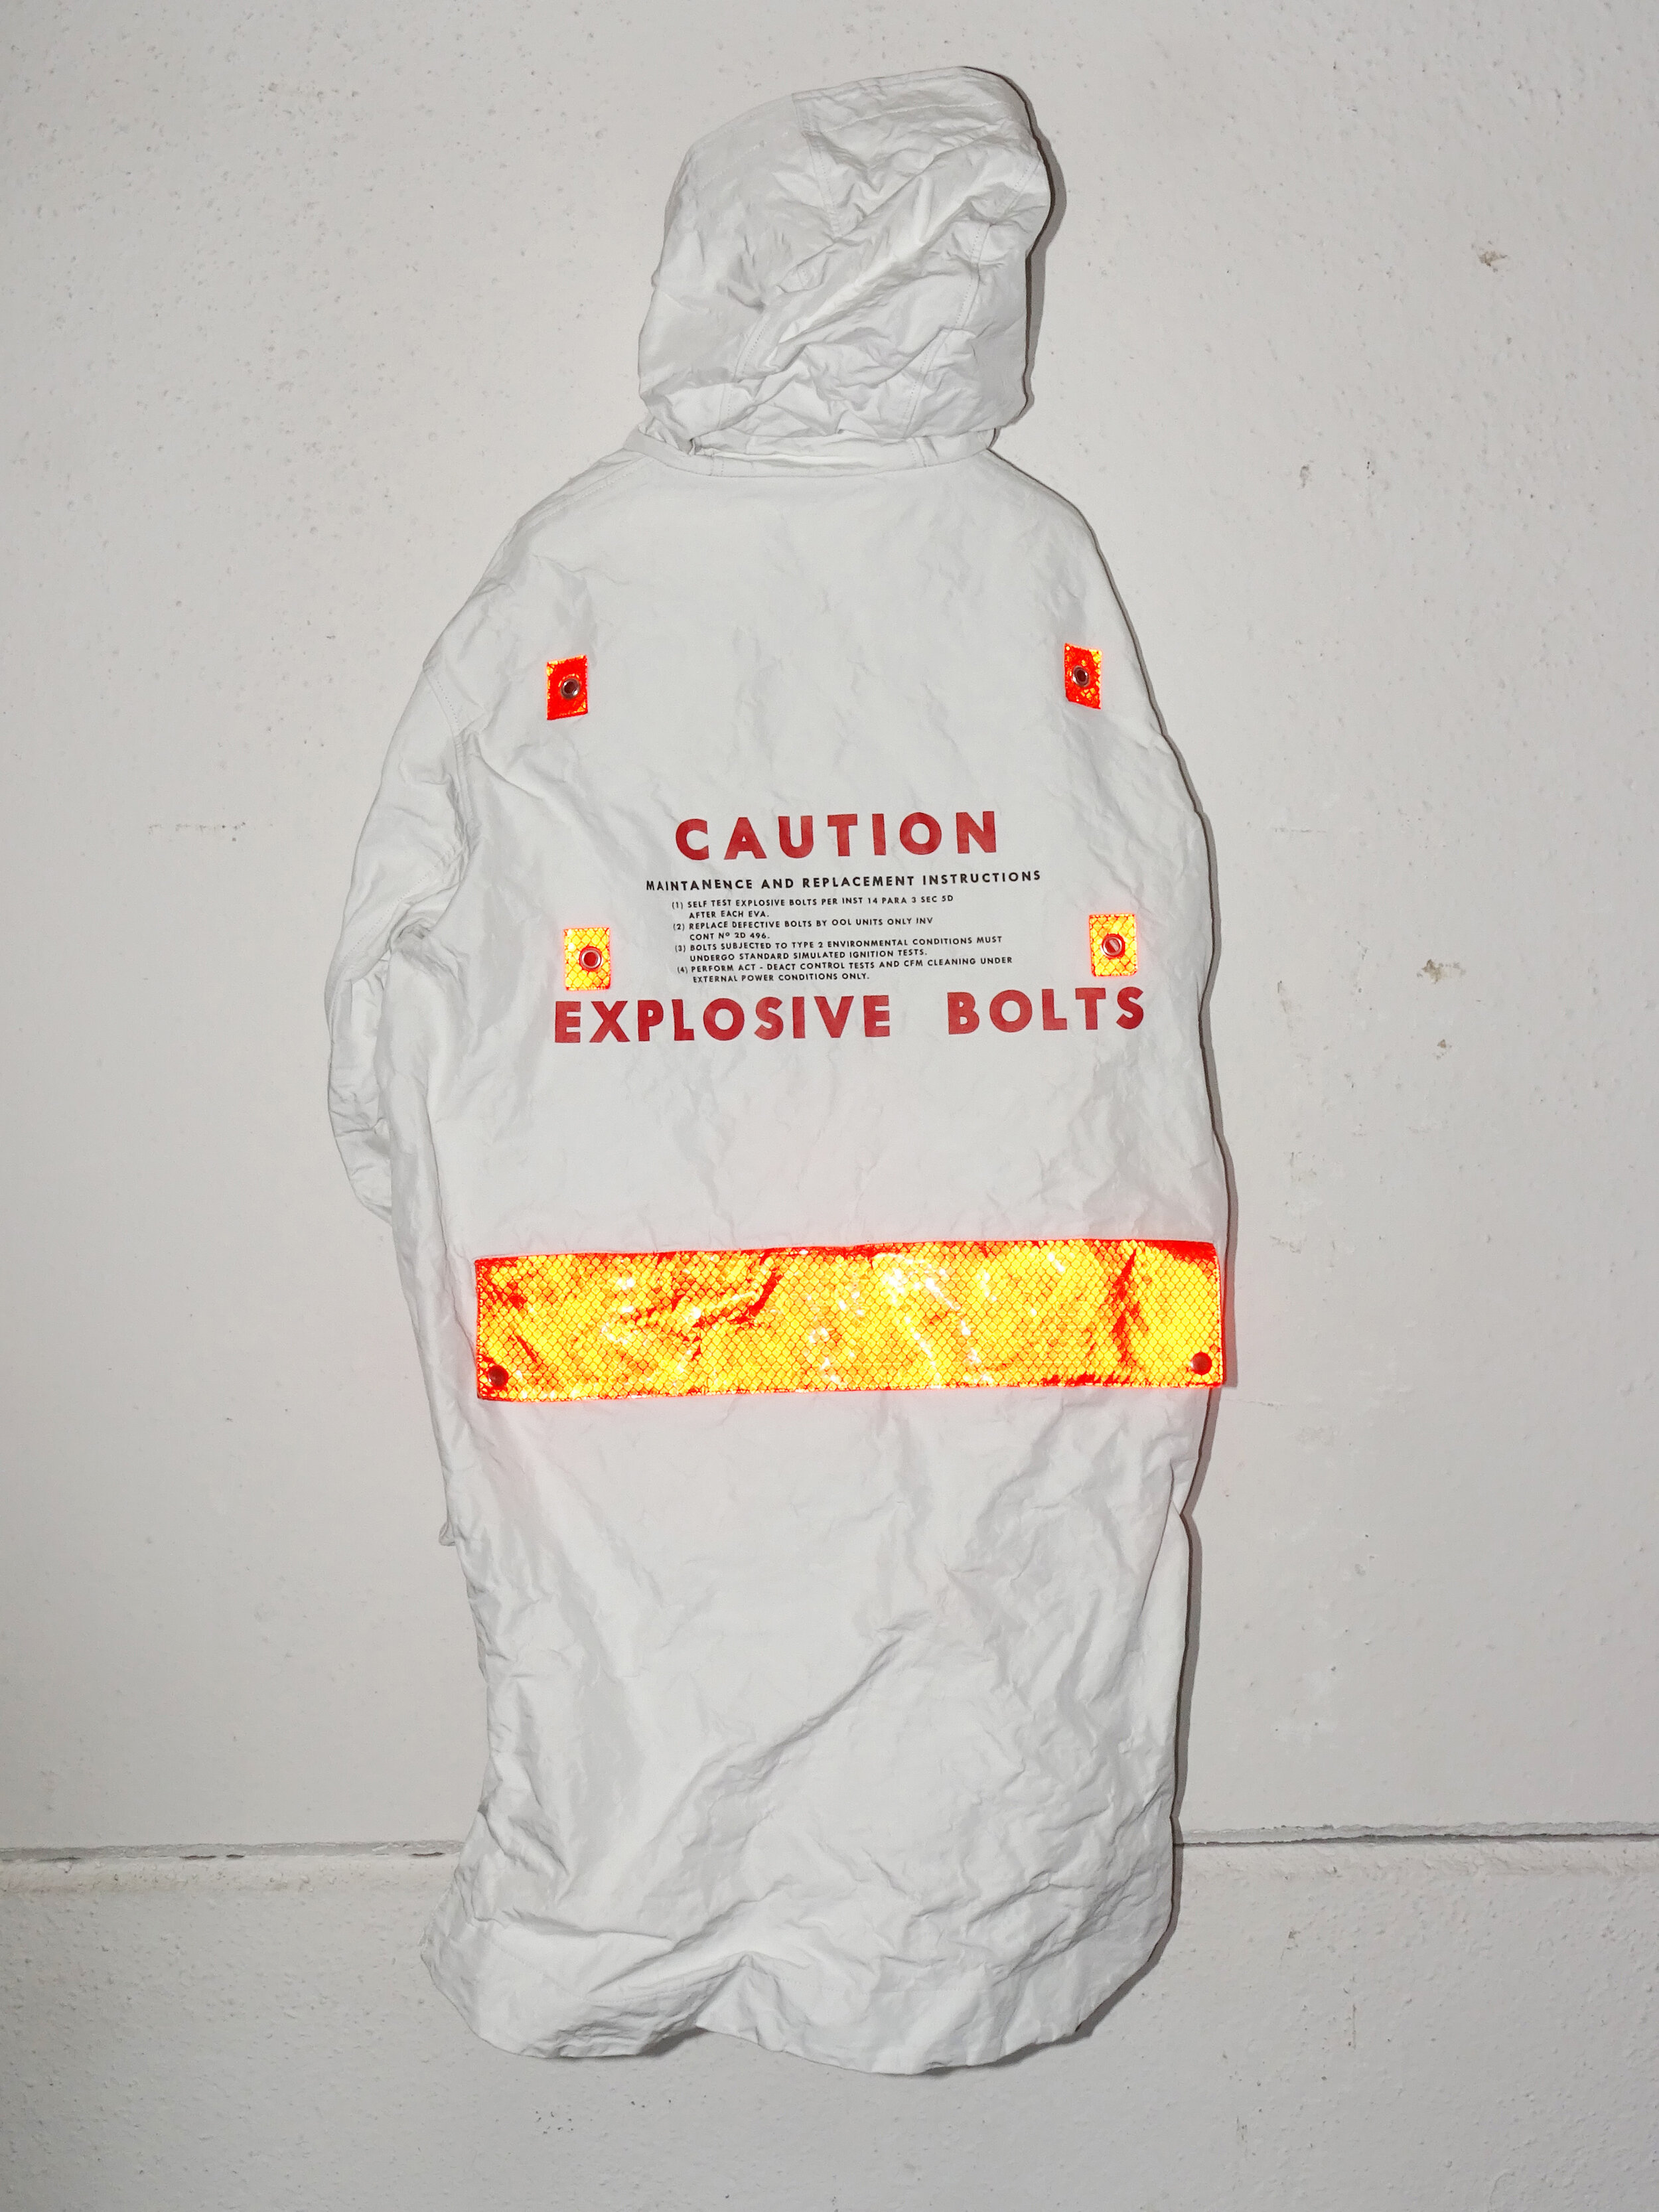  UNDERCOVER SPACE ODYSSEY EXPLOSIVE BOLTS PARKA, INSPIRED BY “2001. SPACE ODYSSEY”, BY JUN TAKAHASHI 2018.  